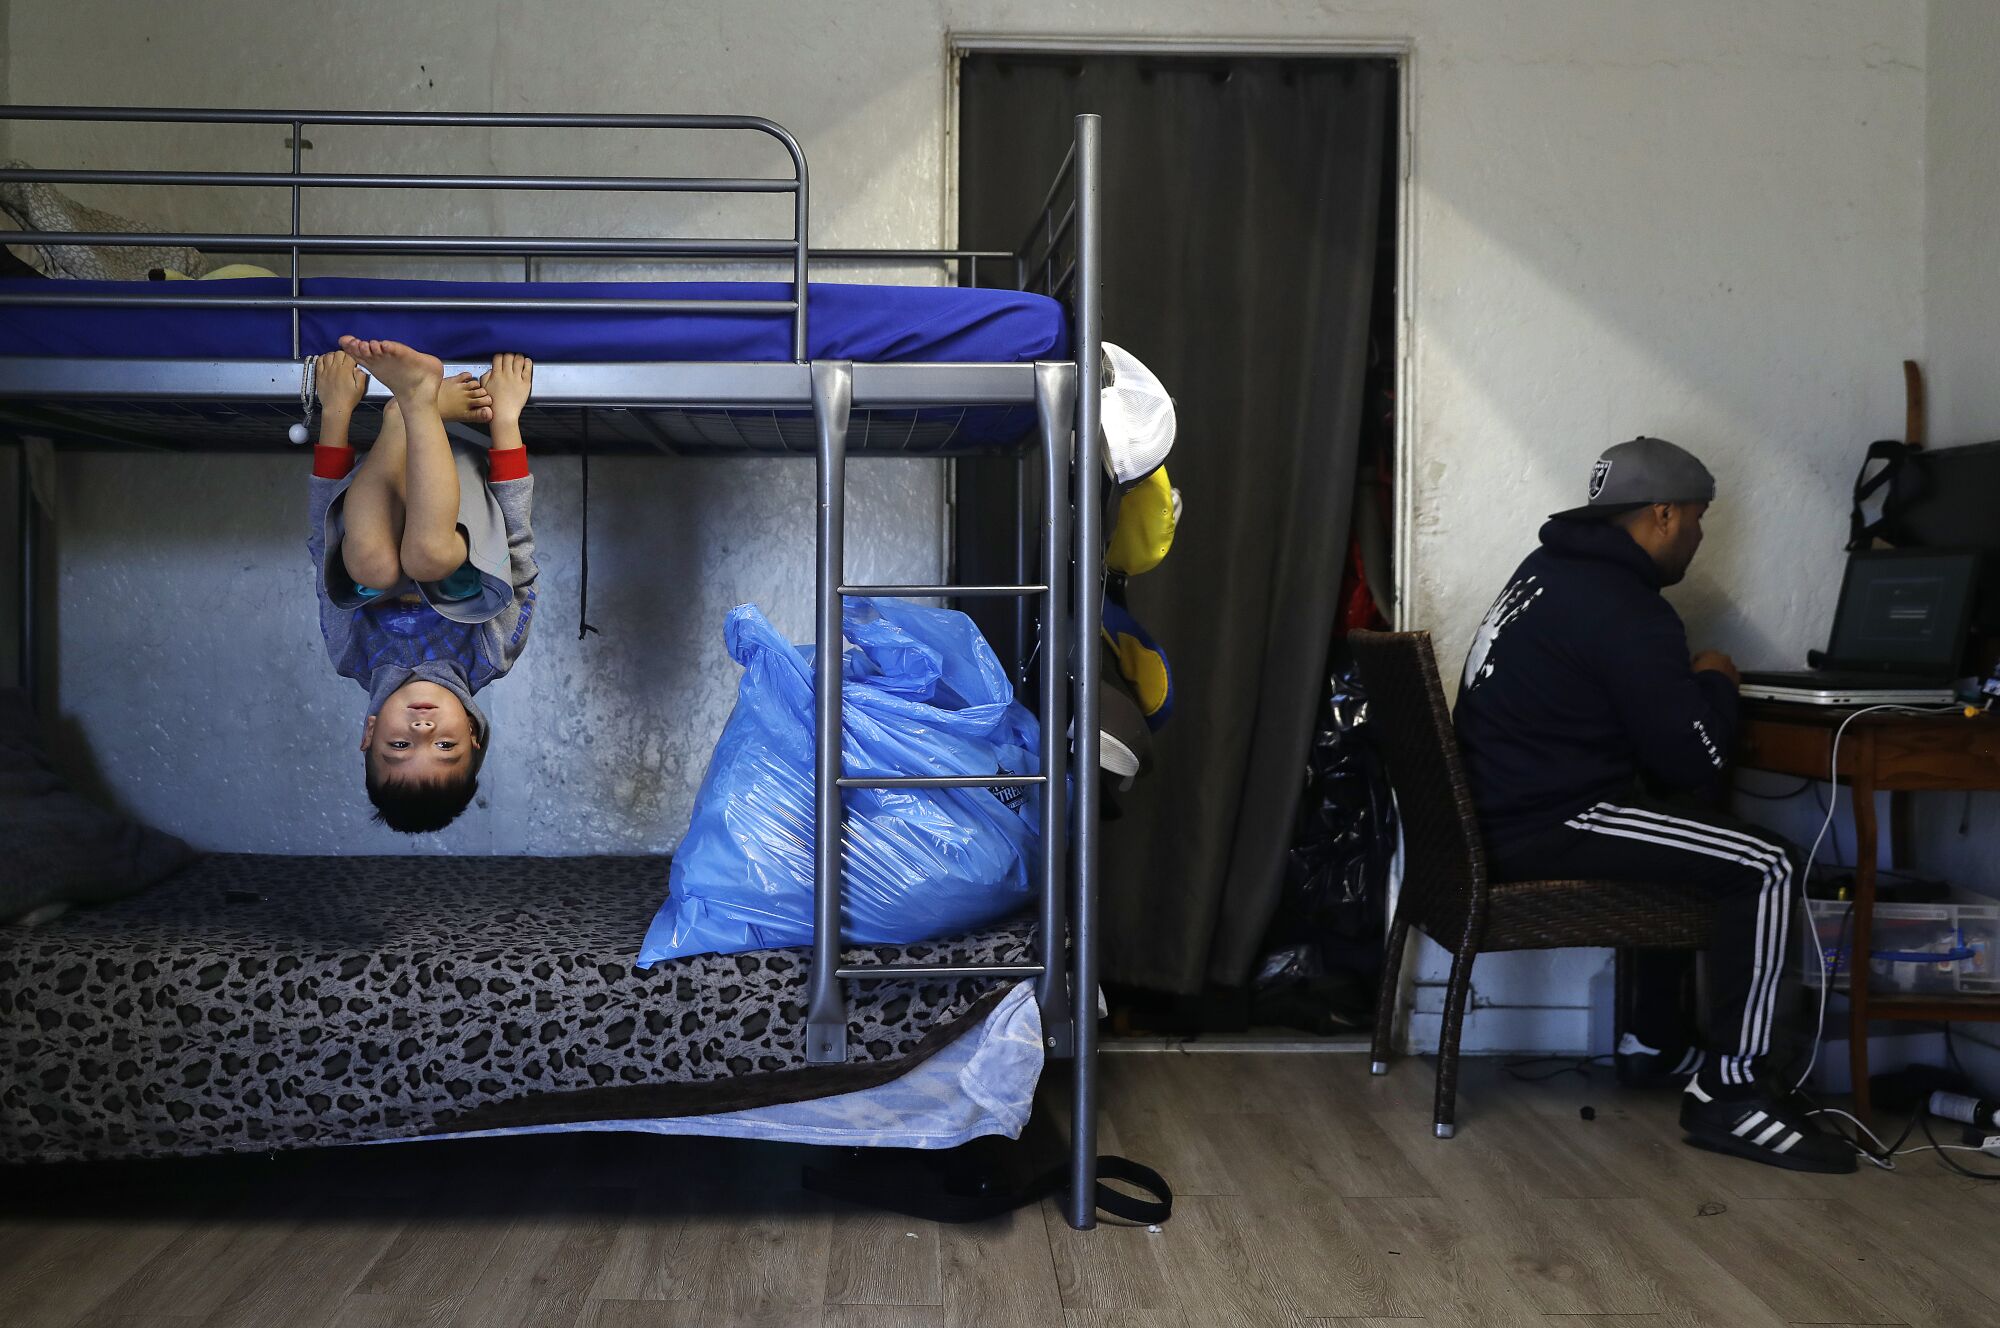 A boy hangs upside down on a bunk bed, while a man sits in front of the computer on the right